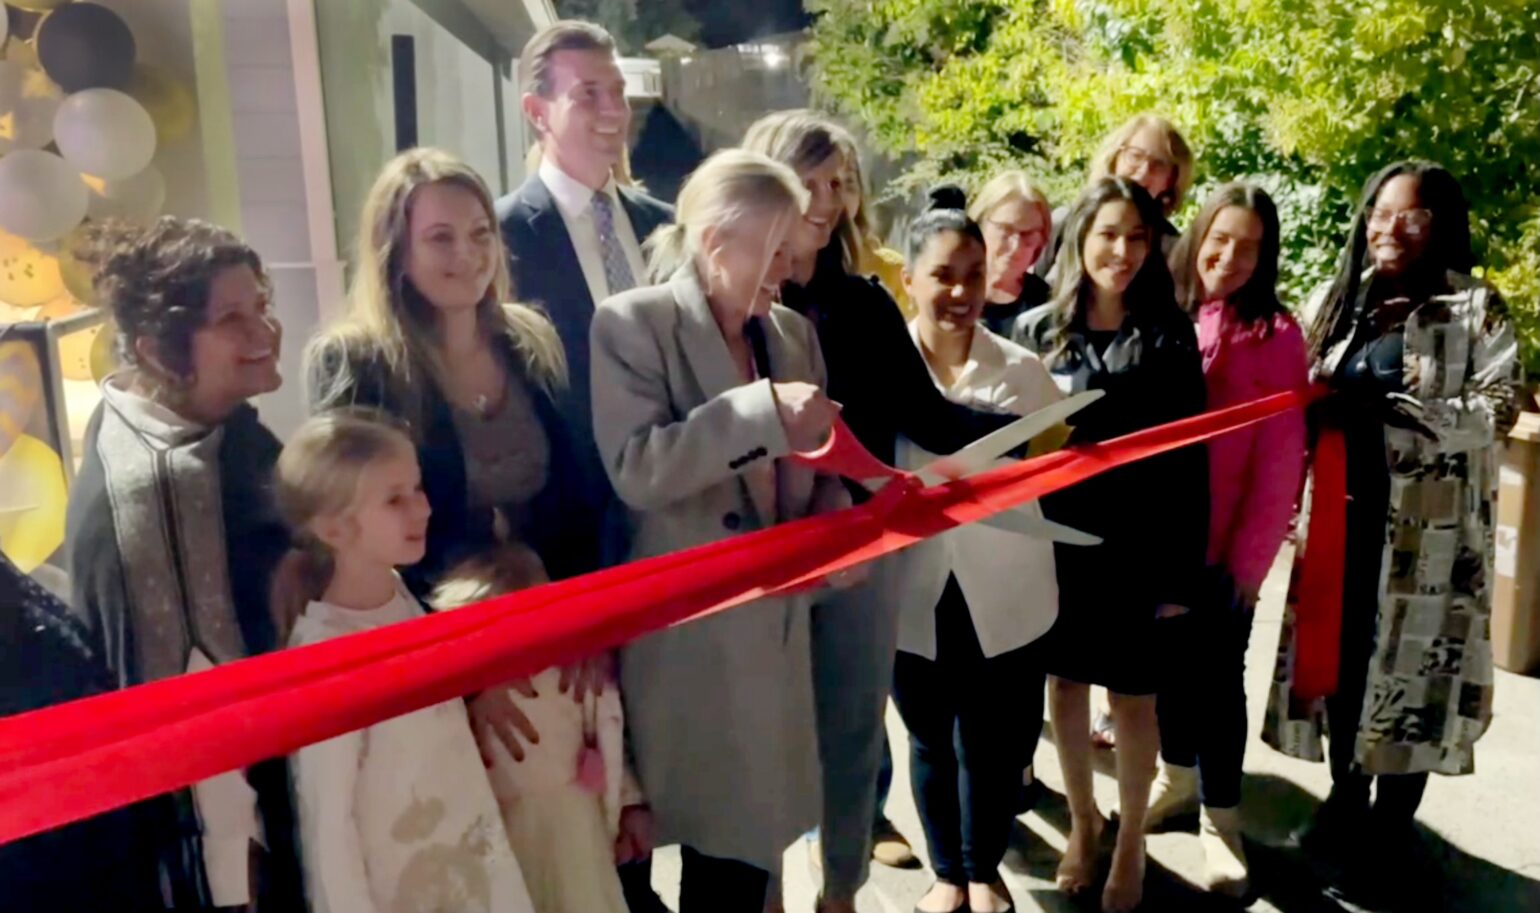 Ribbon Cutting at the San Rafael PostPartum Support Center - New in Town. 